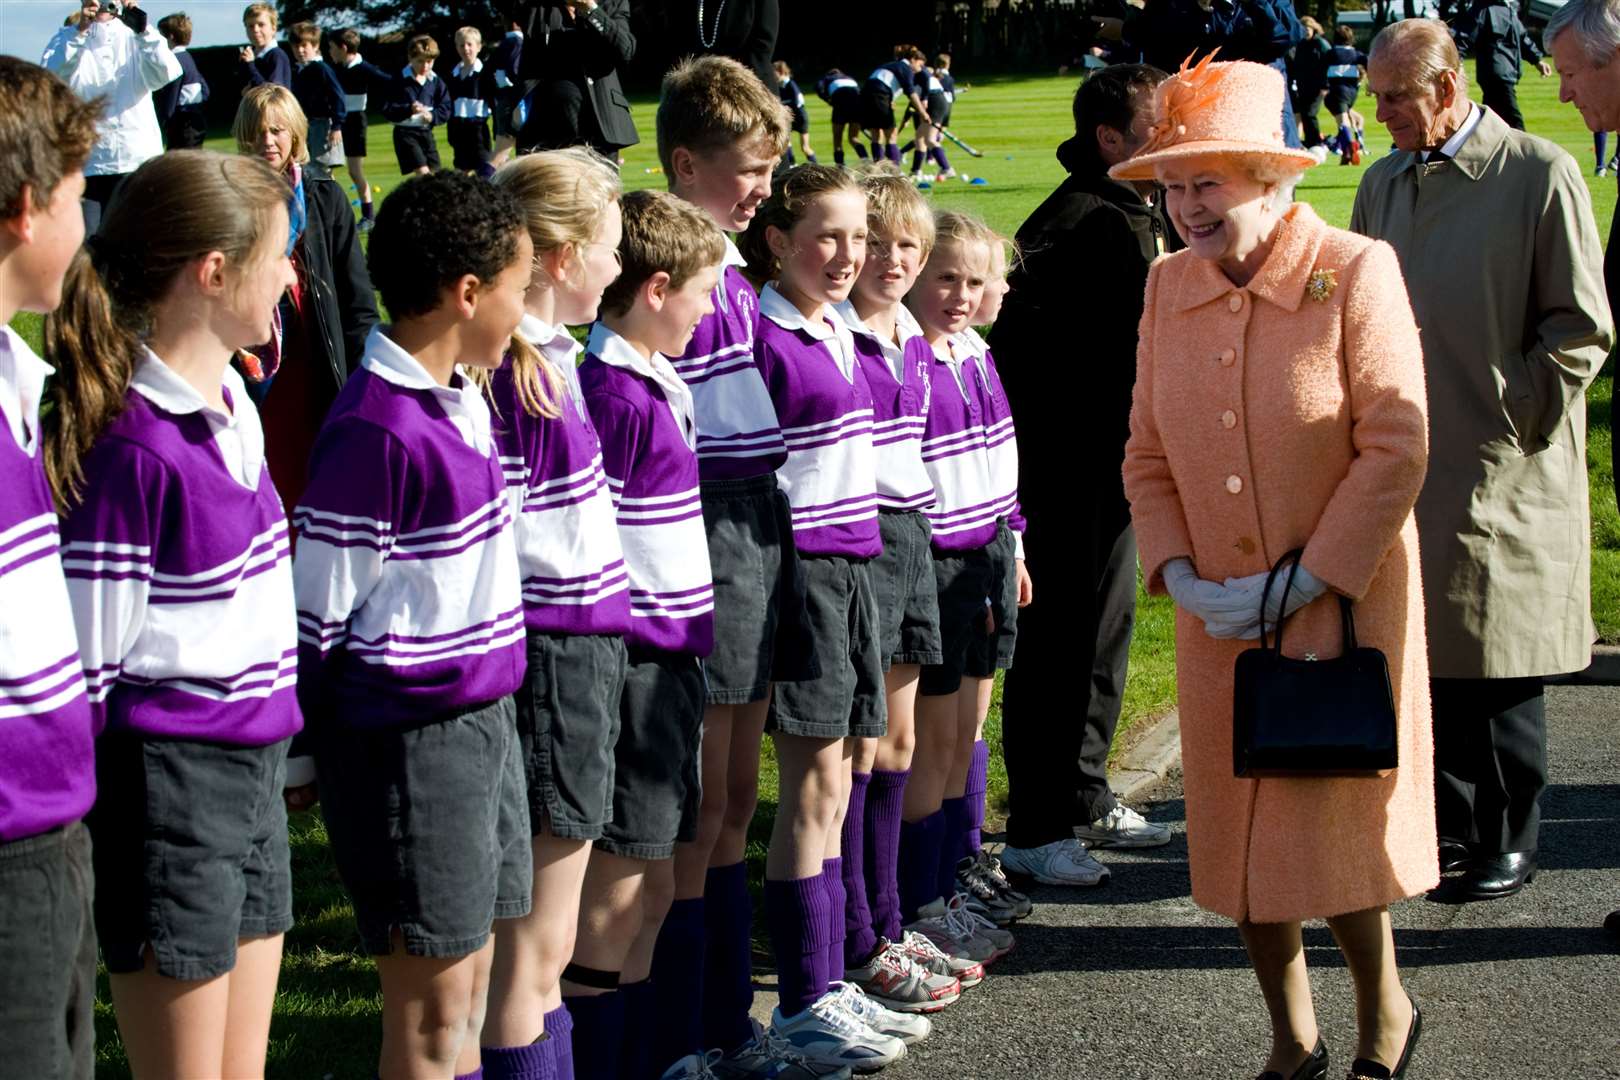 The Queen during a visit to the school in 2010 to open a new sports hall.